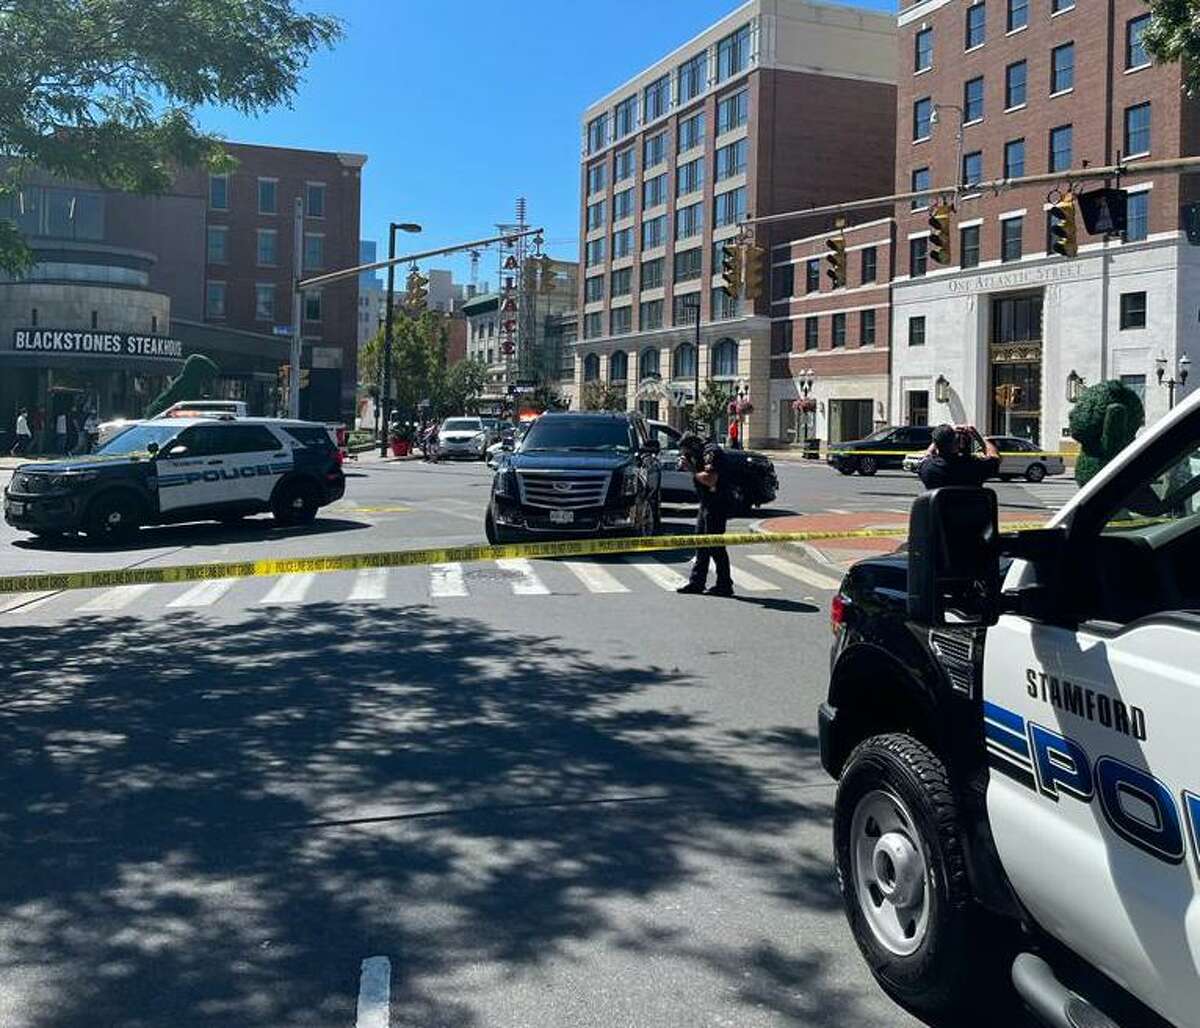 Two Norwalk residents were injured Wednesday when they were struck by a car at Bedford and Broad streets in Stamford, police said.